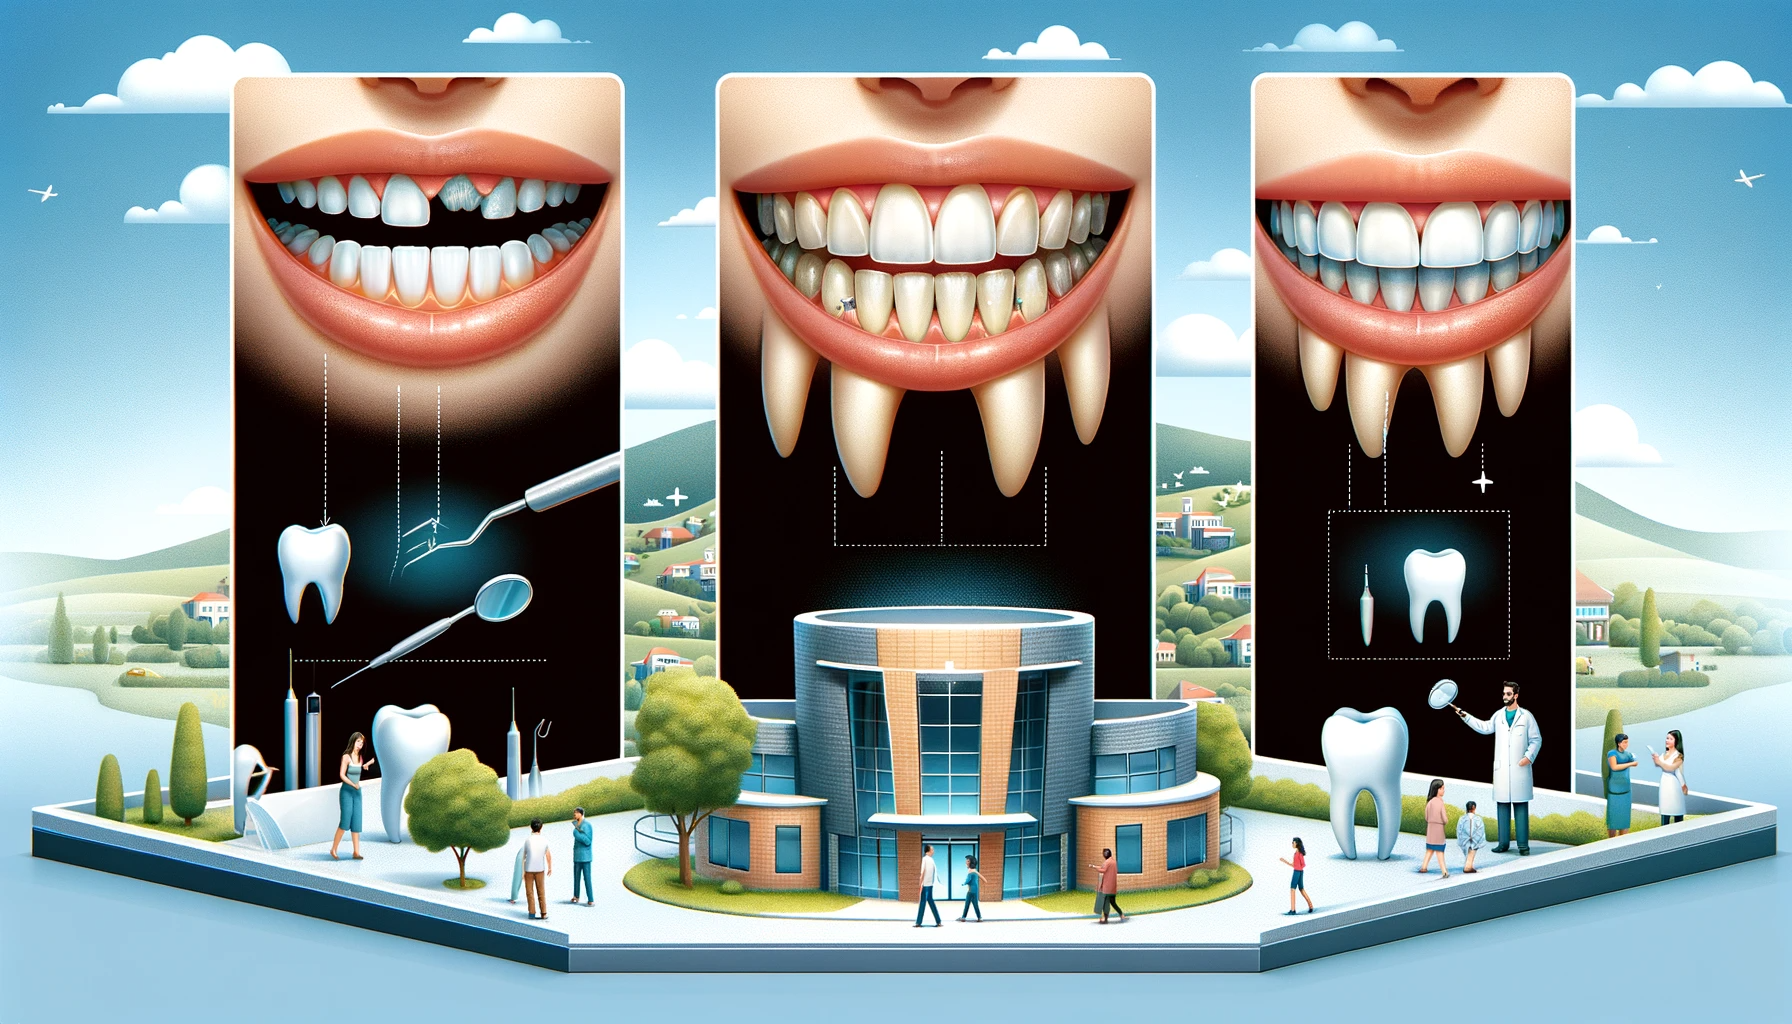 Can cosmetic dentistry fix gaps, crooked teeth, or stained teeth?